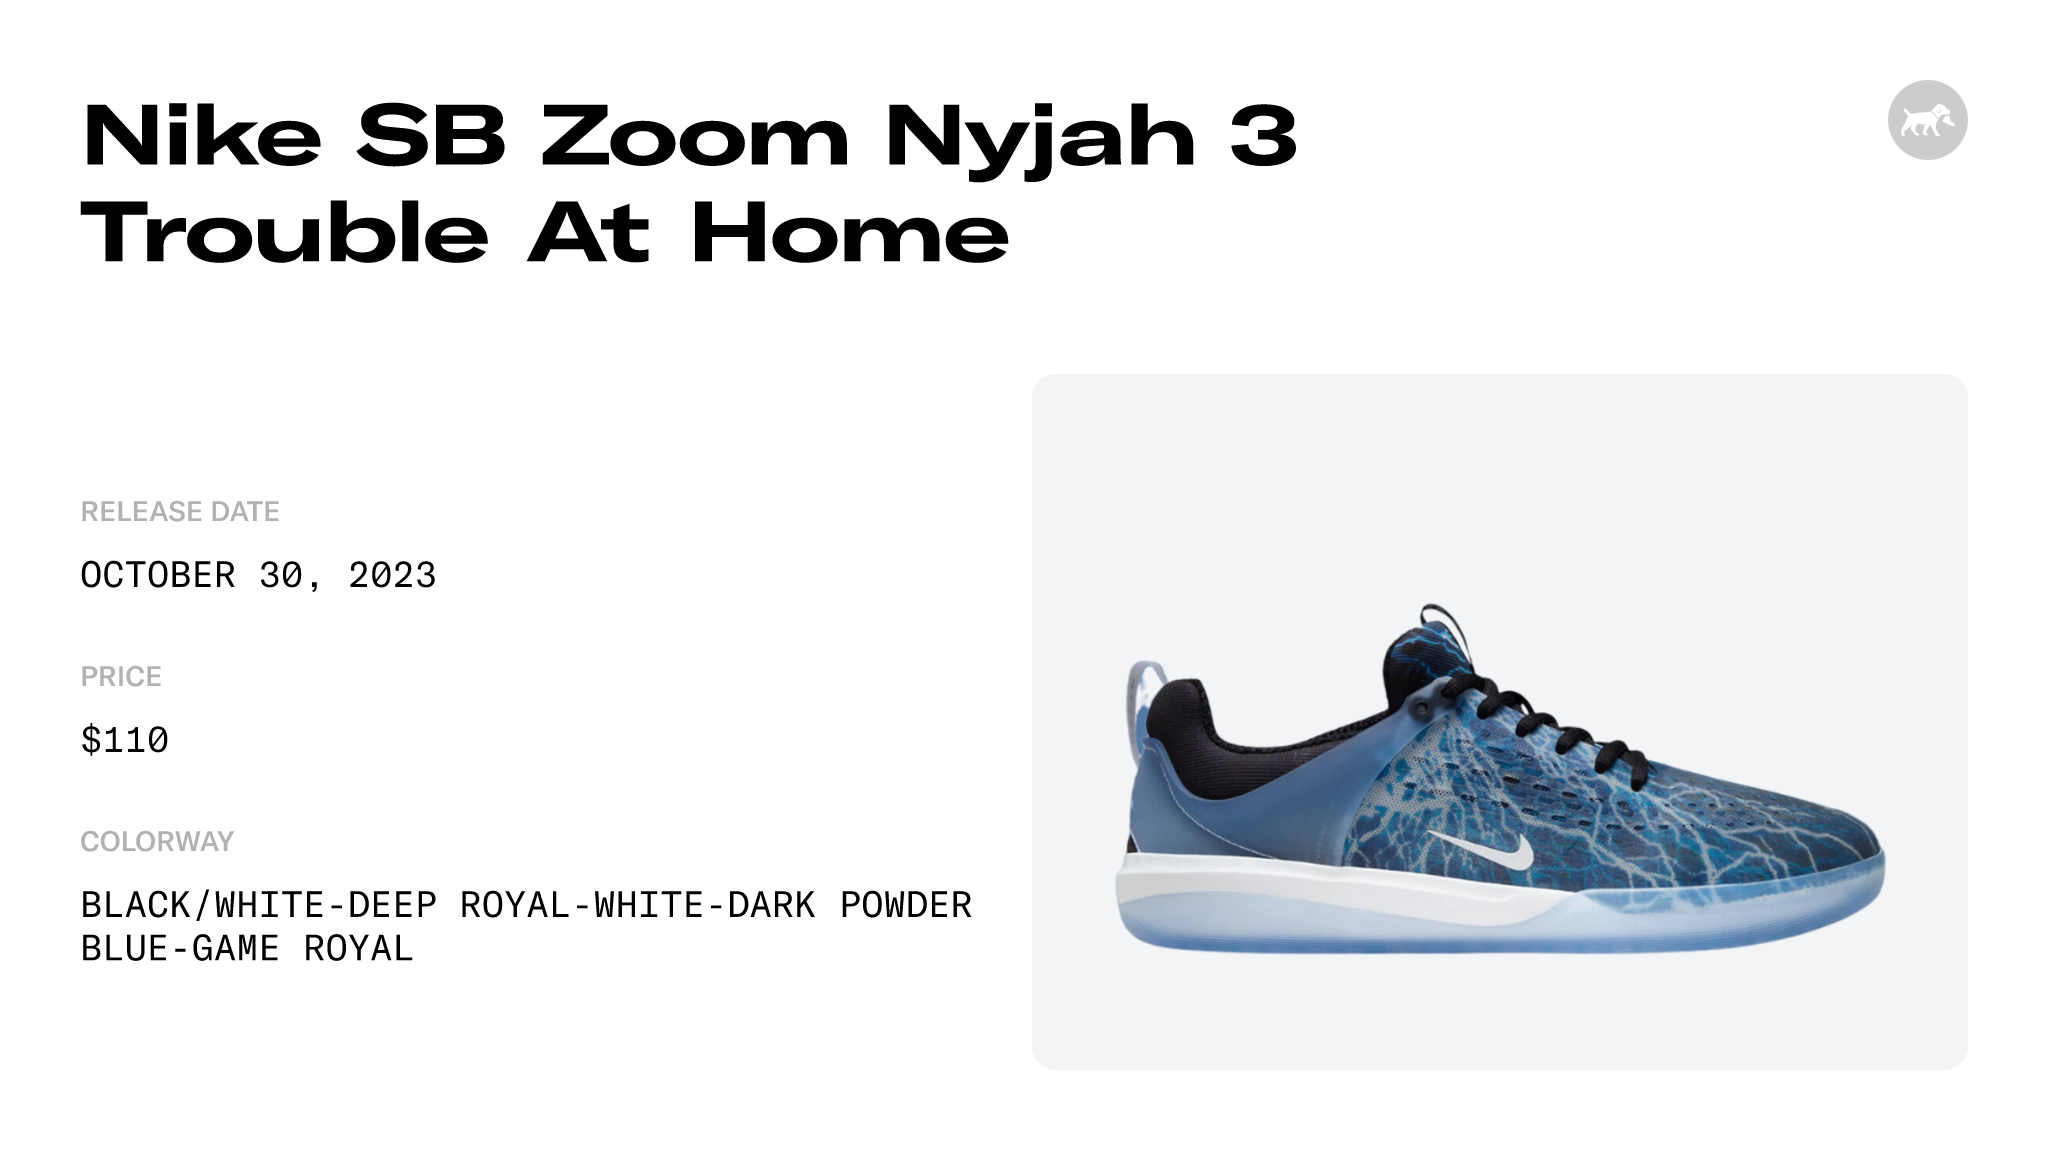 Nike SB Zoom Nyjah 3 Trouble At Home - FB2394-001 Raffles and Release Date